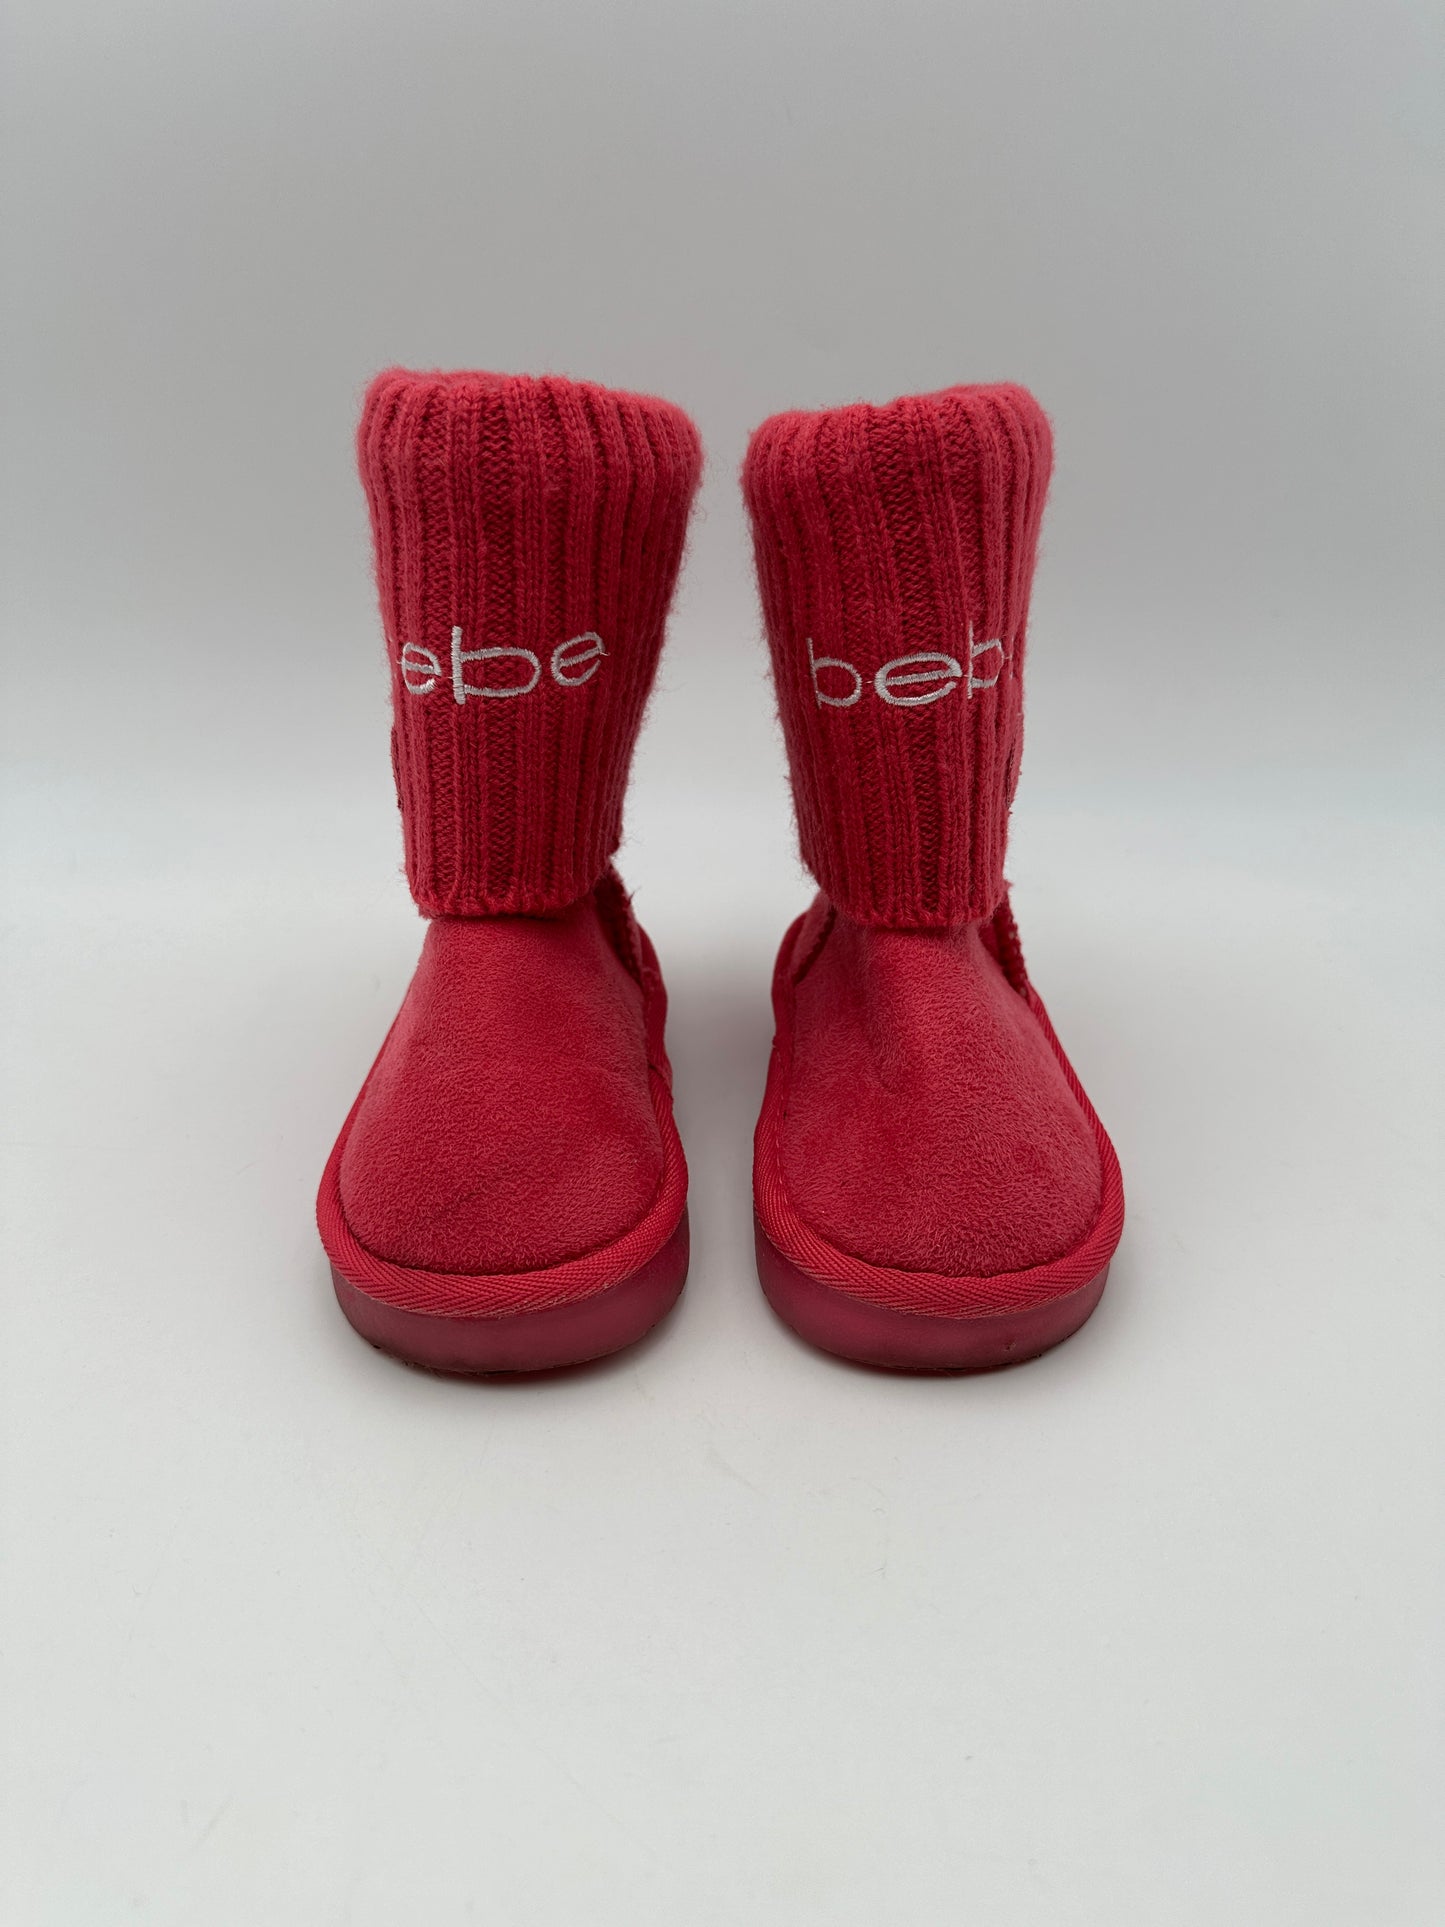 Bebe Girls' Size 10 Hot Pink Fold Over Microsuede Light Up Boots